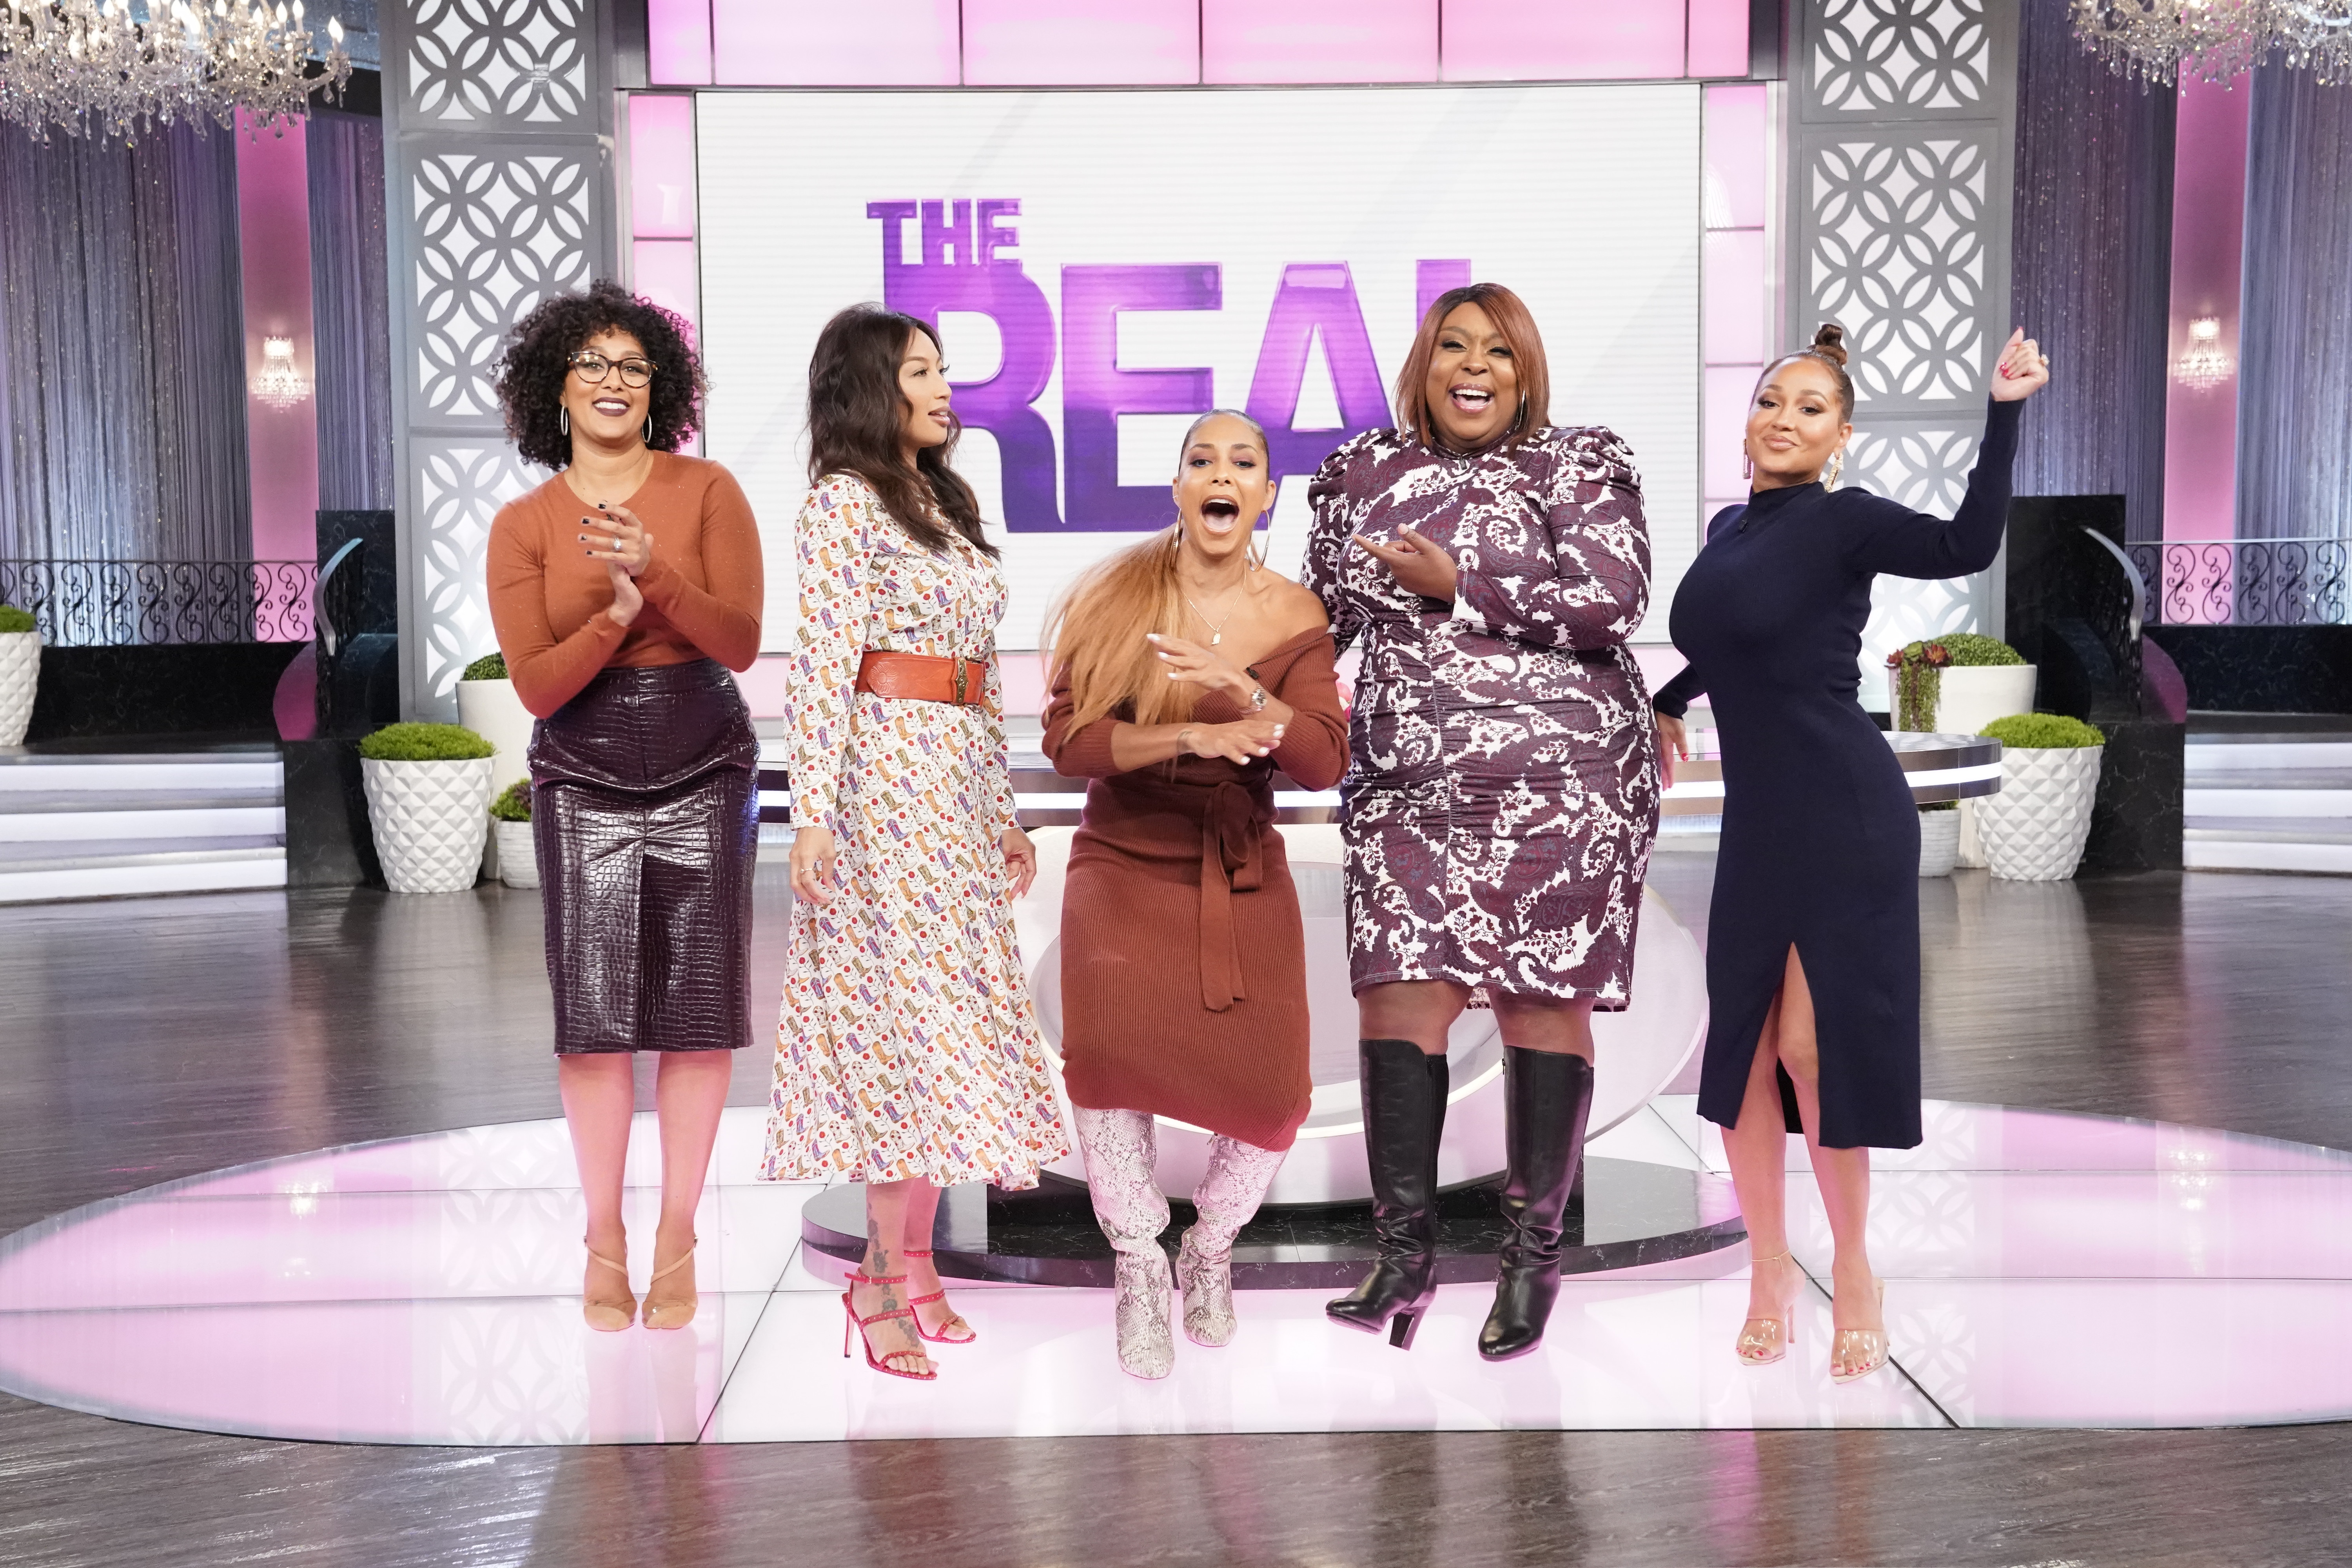 THE REAL Welcomes Back Guest Co-Host Amanda Seales And The Real Hunks of Daytime!